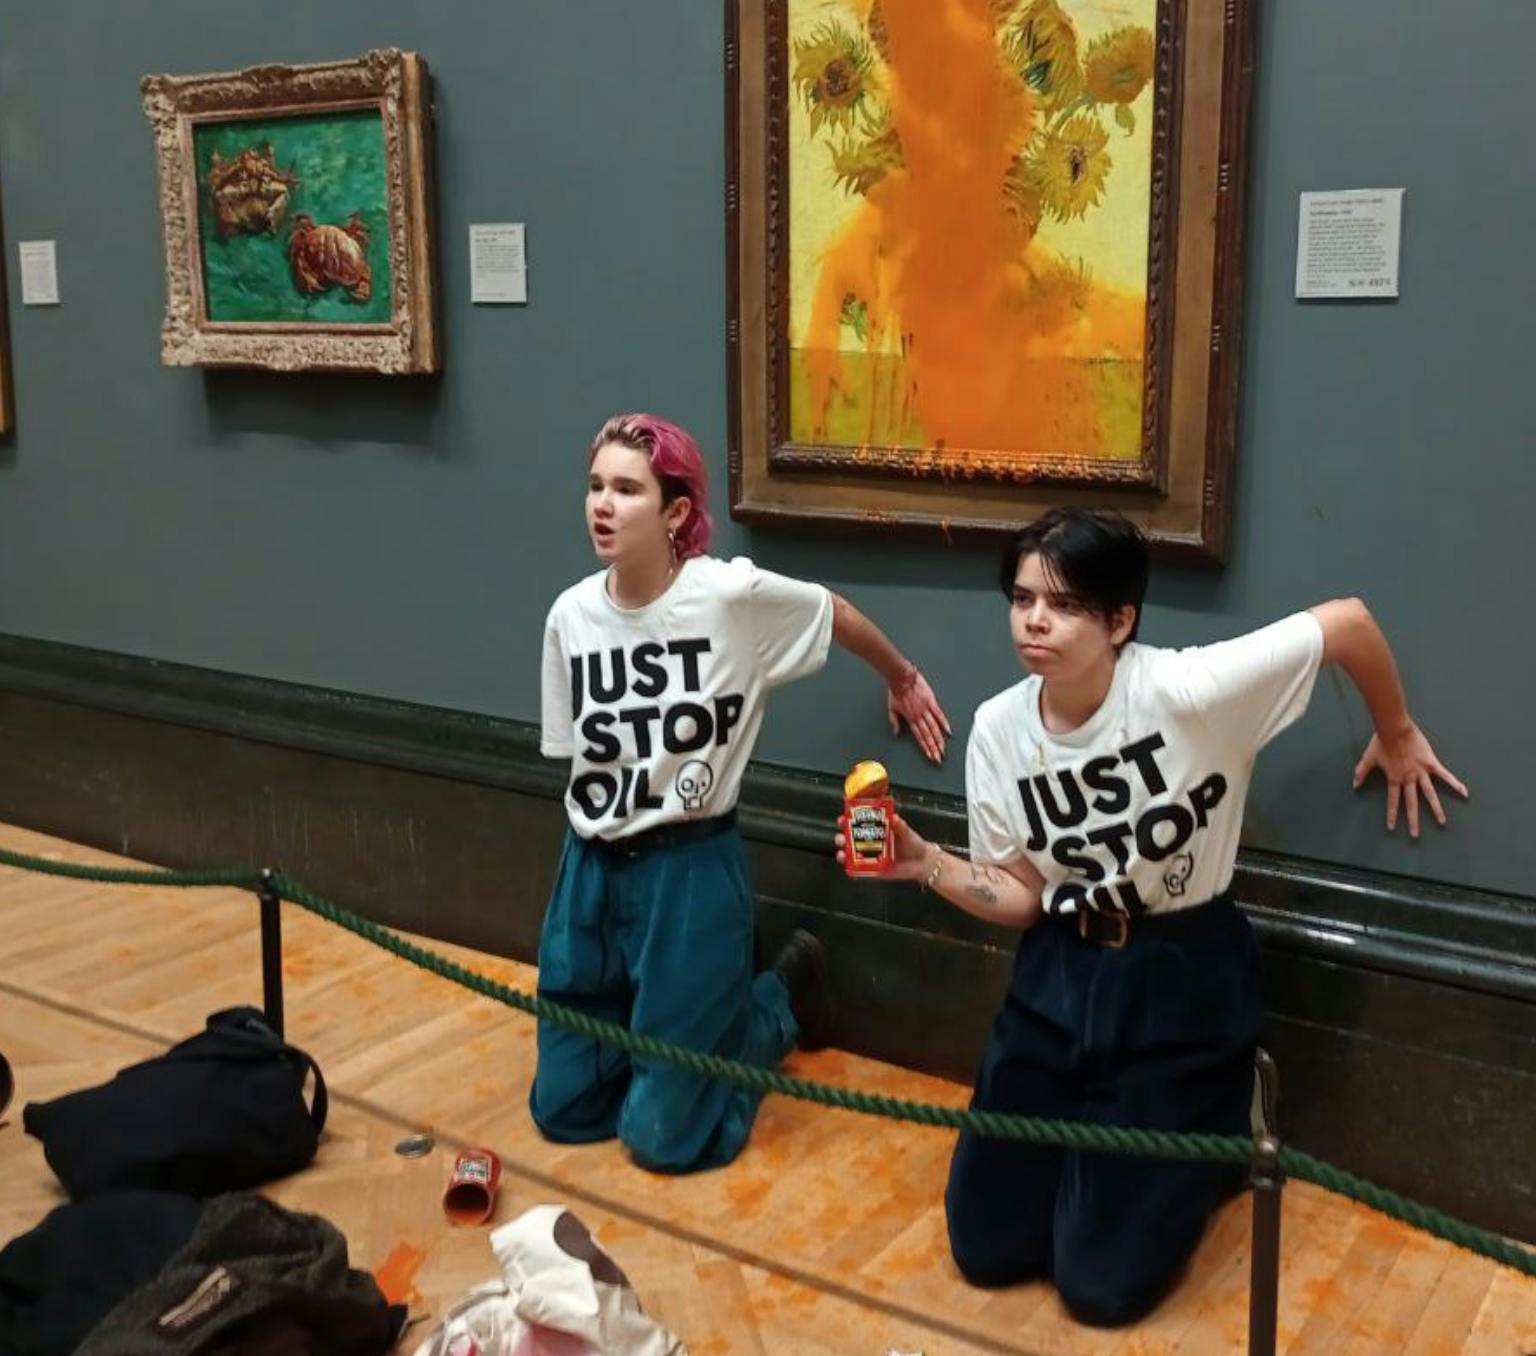 Two people in white shirts with the text 'JUST STOP OIL' kneel in front of a painting, and the palms of one hand each are placed against the wall. Red liquid is seen over the painting.